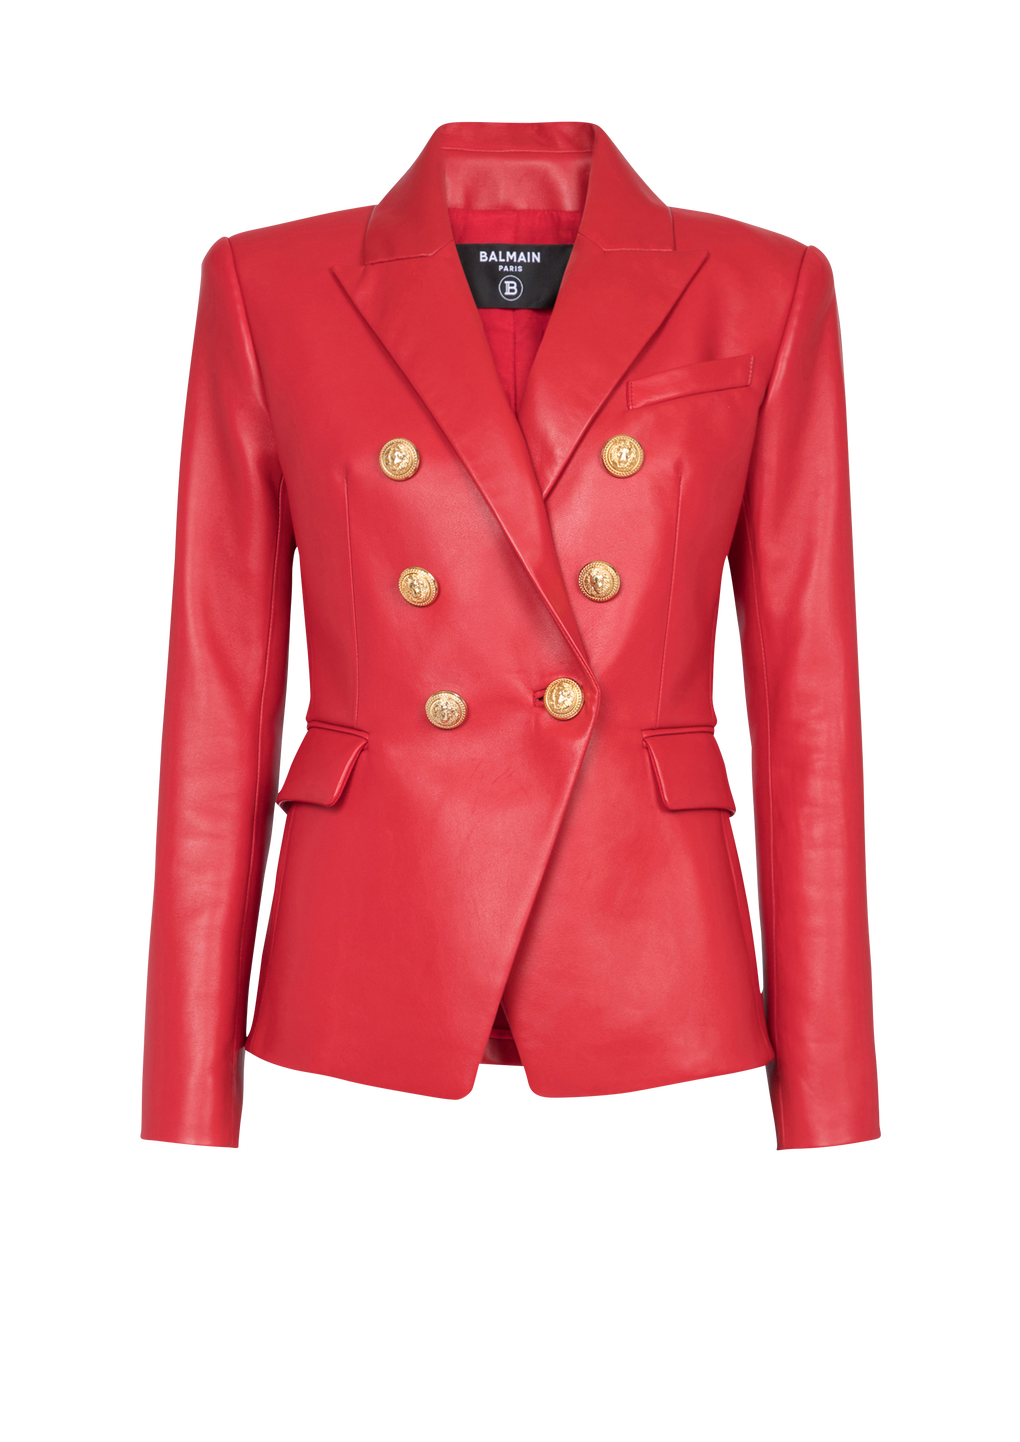 Double-breasted leather blazer, red, hi-res